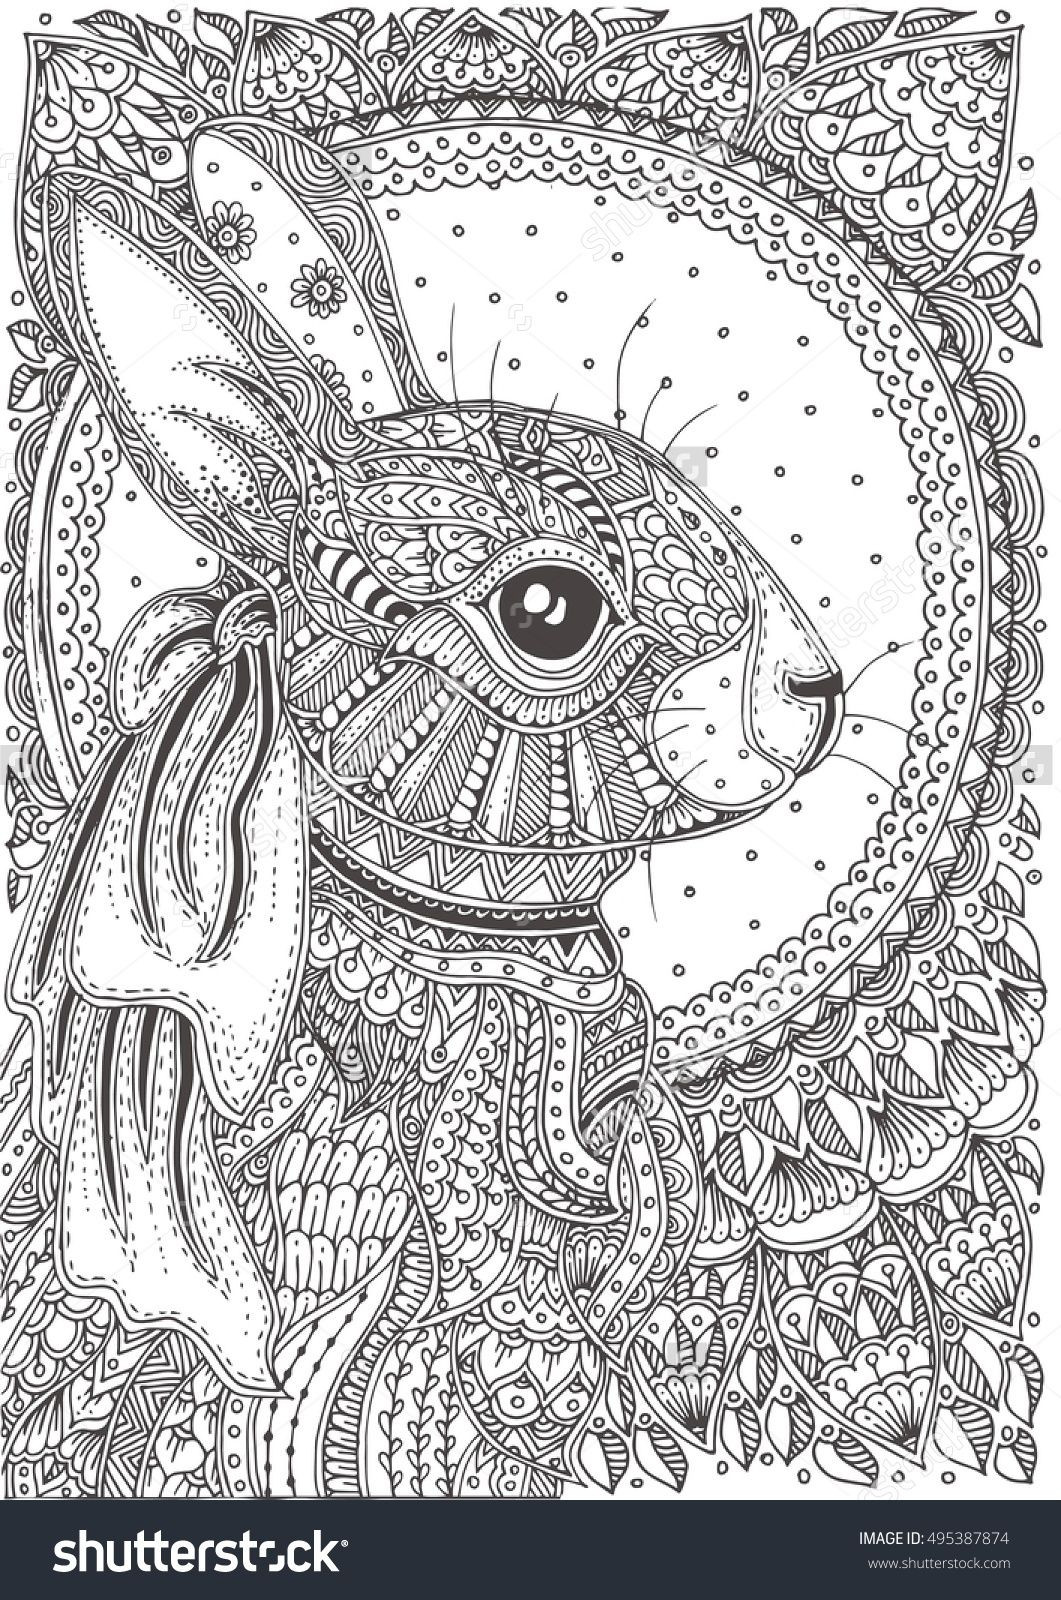 Bunny Coloring Pages For Adults
 Rabbit hand drawn with ethnic floral doodle pattern